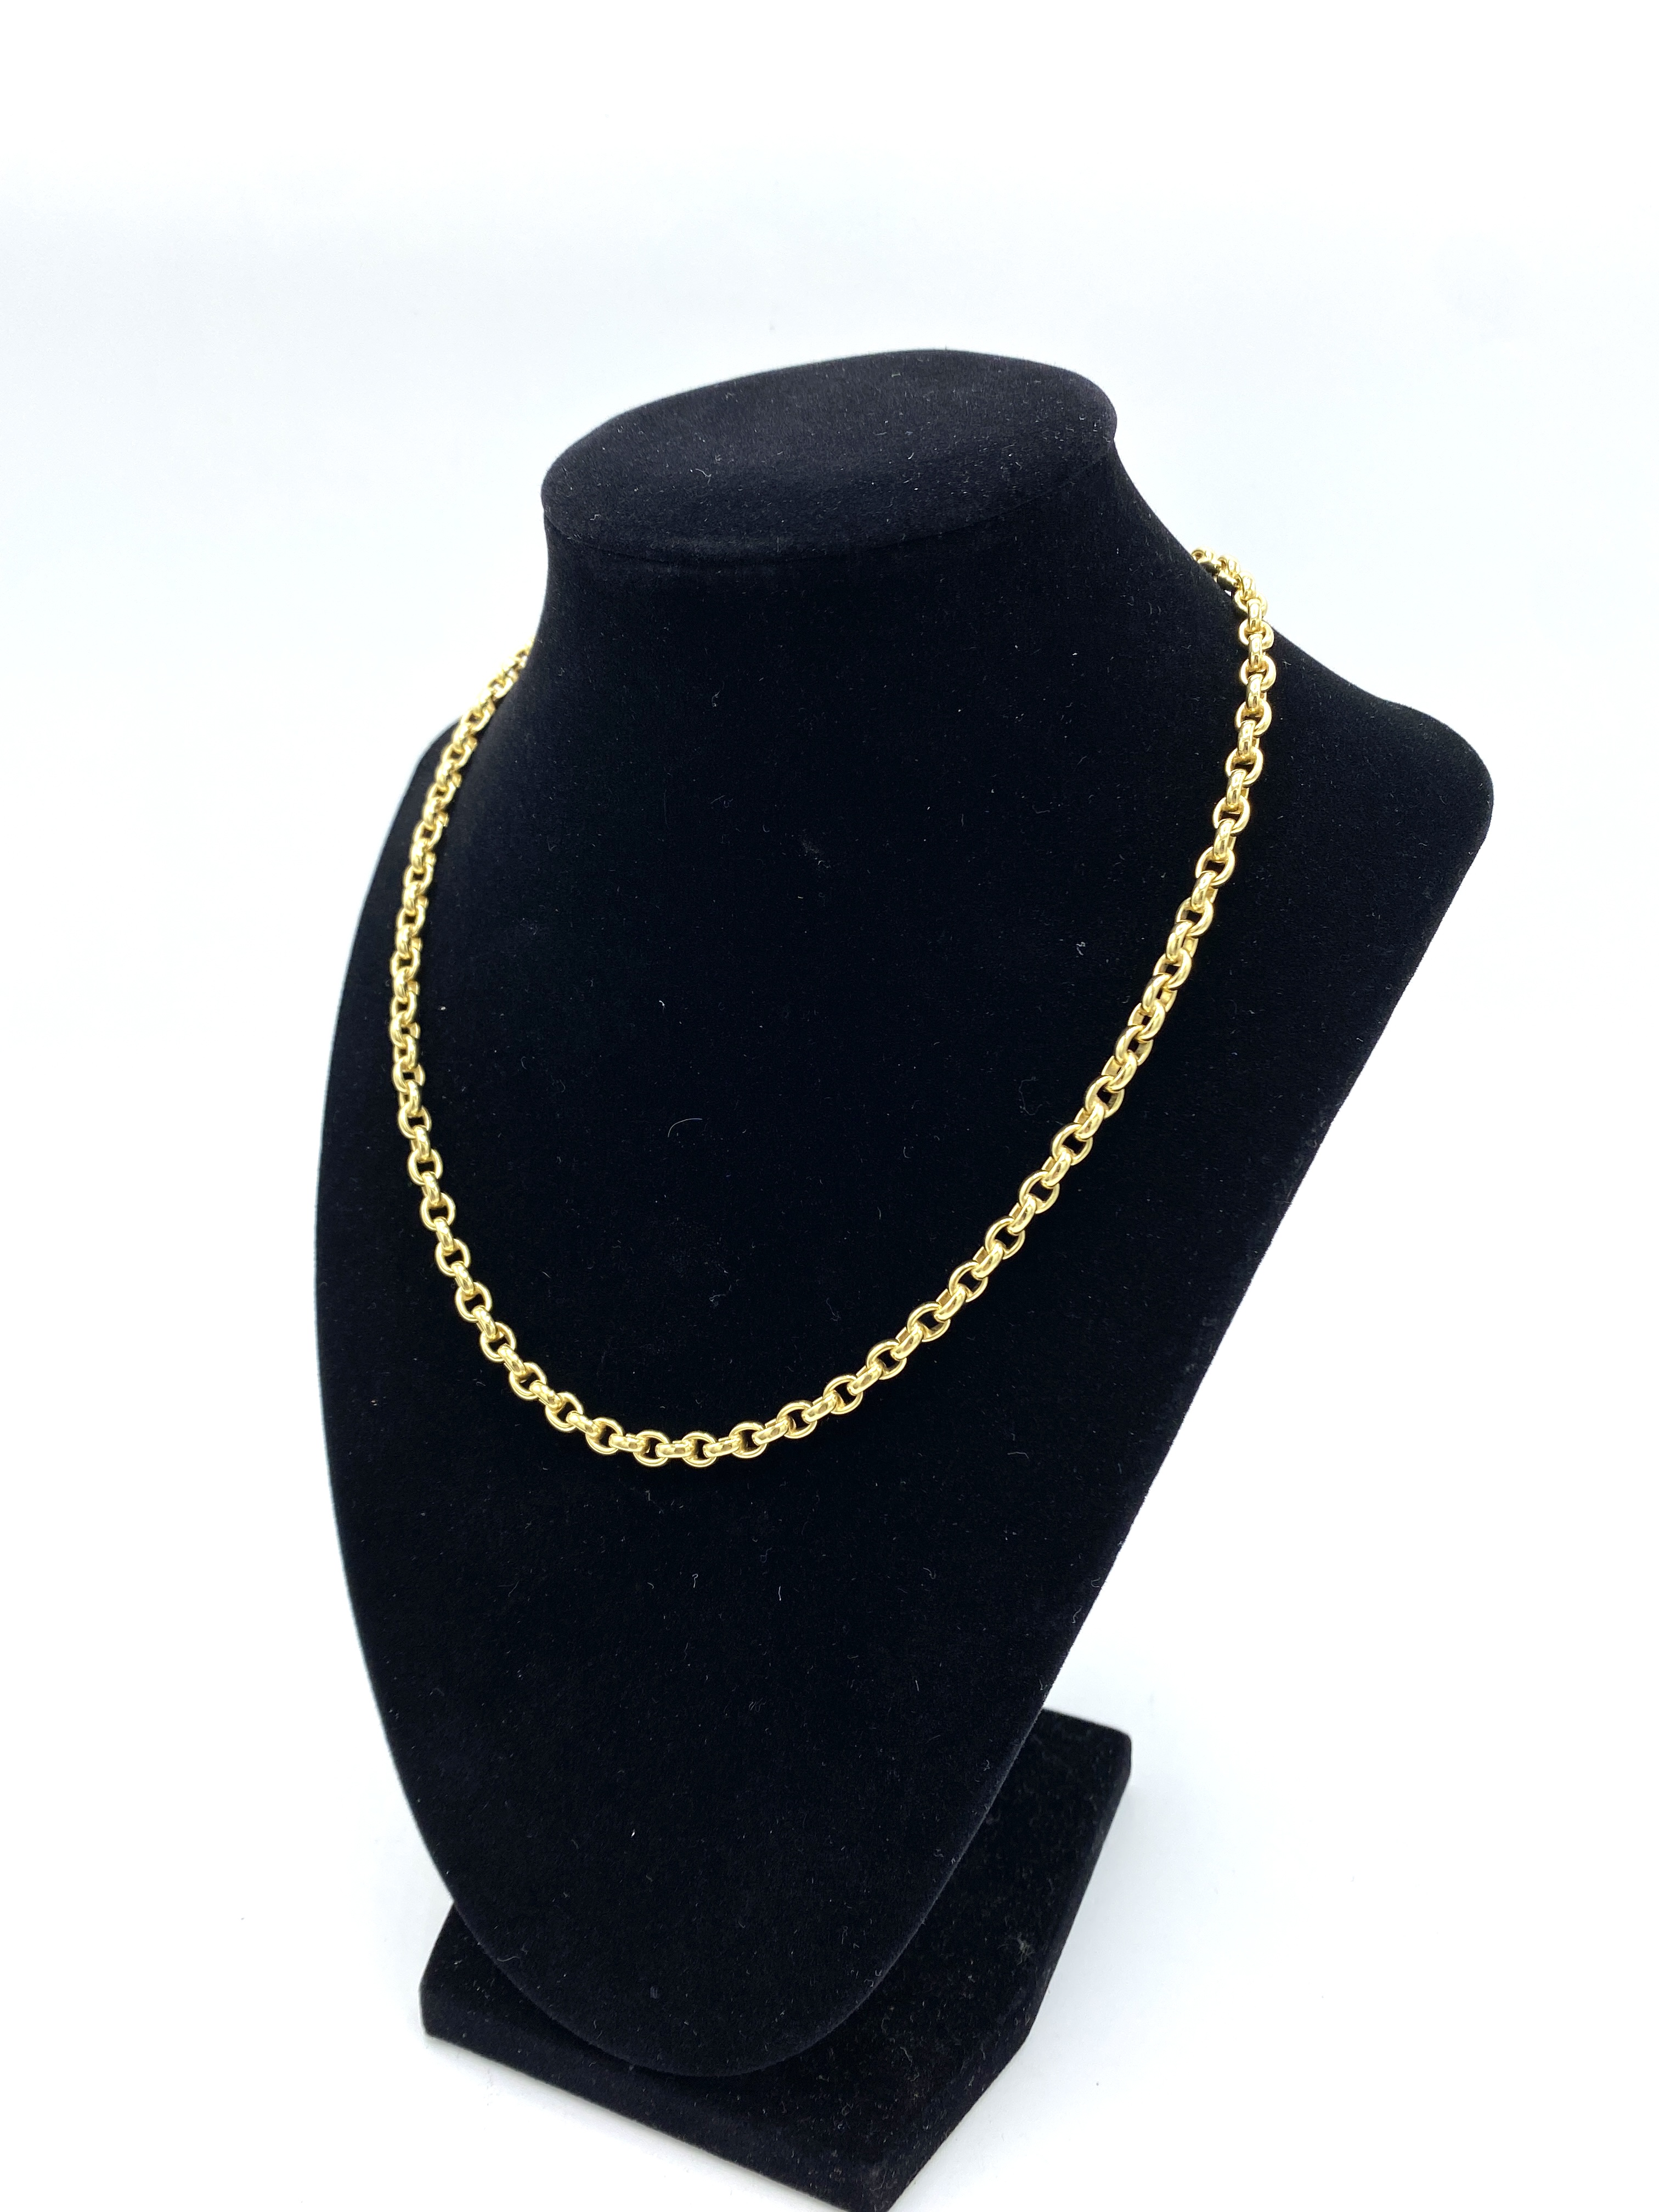 18ct gold Theo Fennell chain - Image 2 of 4